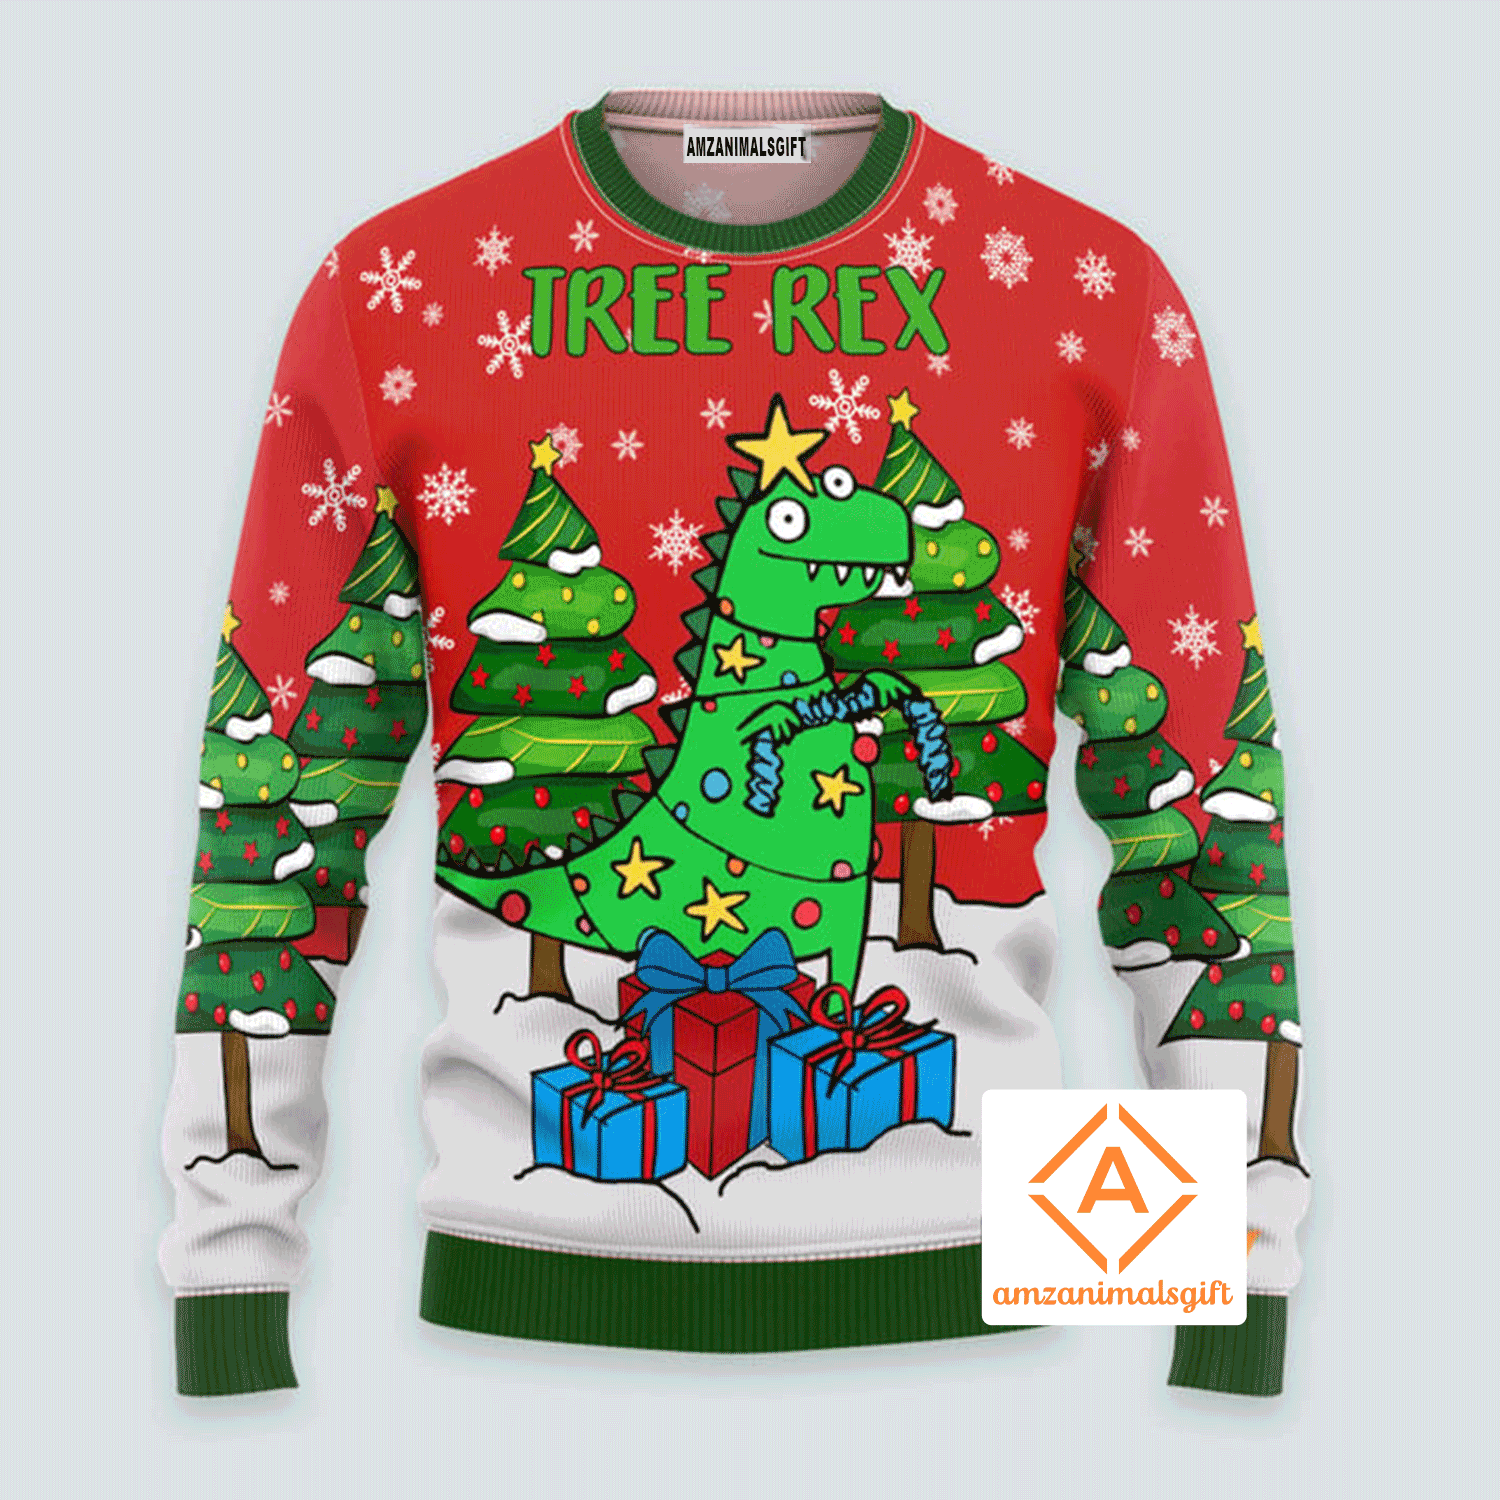 Tree Rex Christmas Sweater, Ugly Sweater For Men & Women, Perfect Outfit For Christmas New Year Autumn Winter